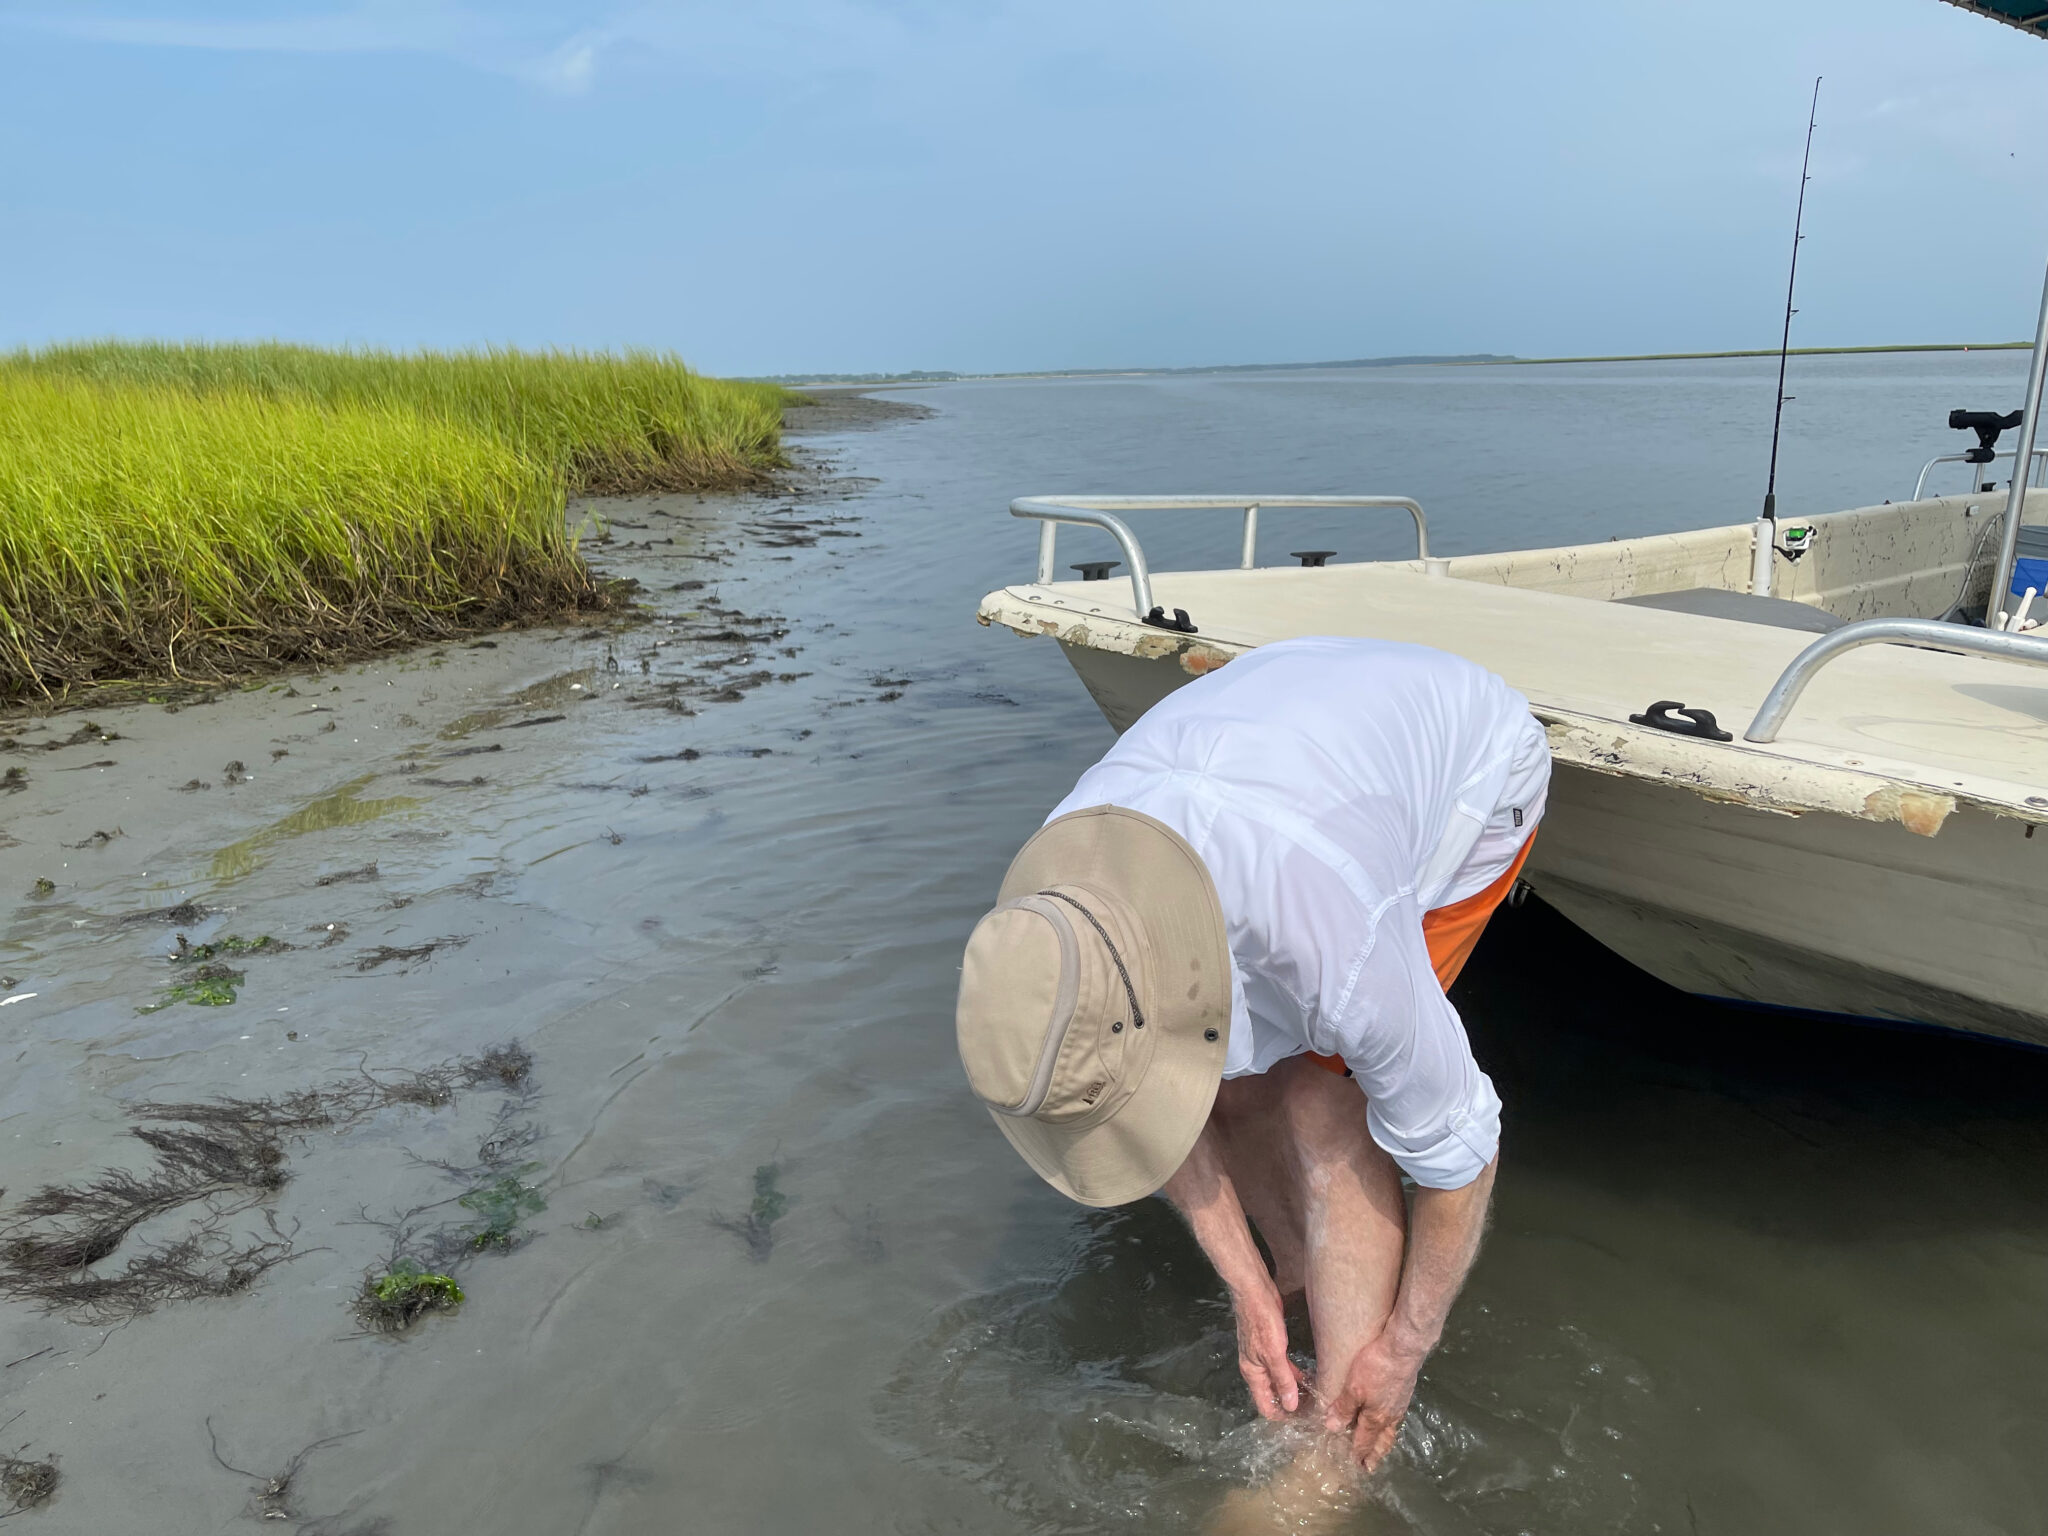 Nick Taylor washing the mud off after clamming at Tom's Cove, Chincoteague, Virginia